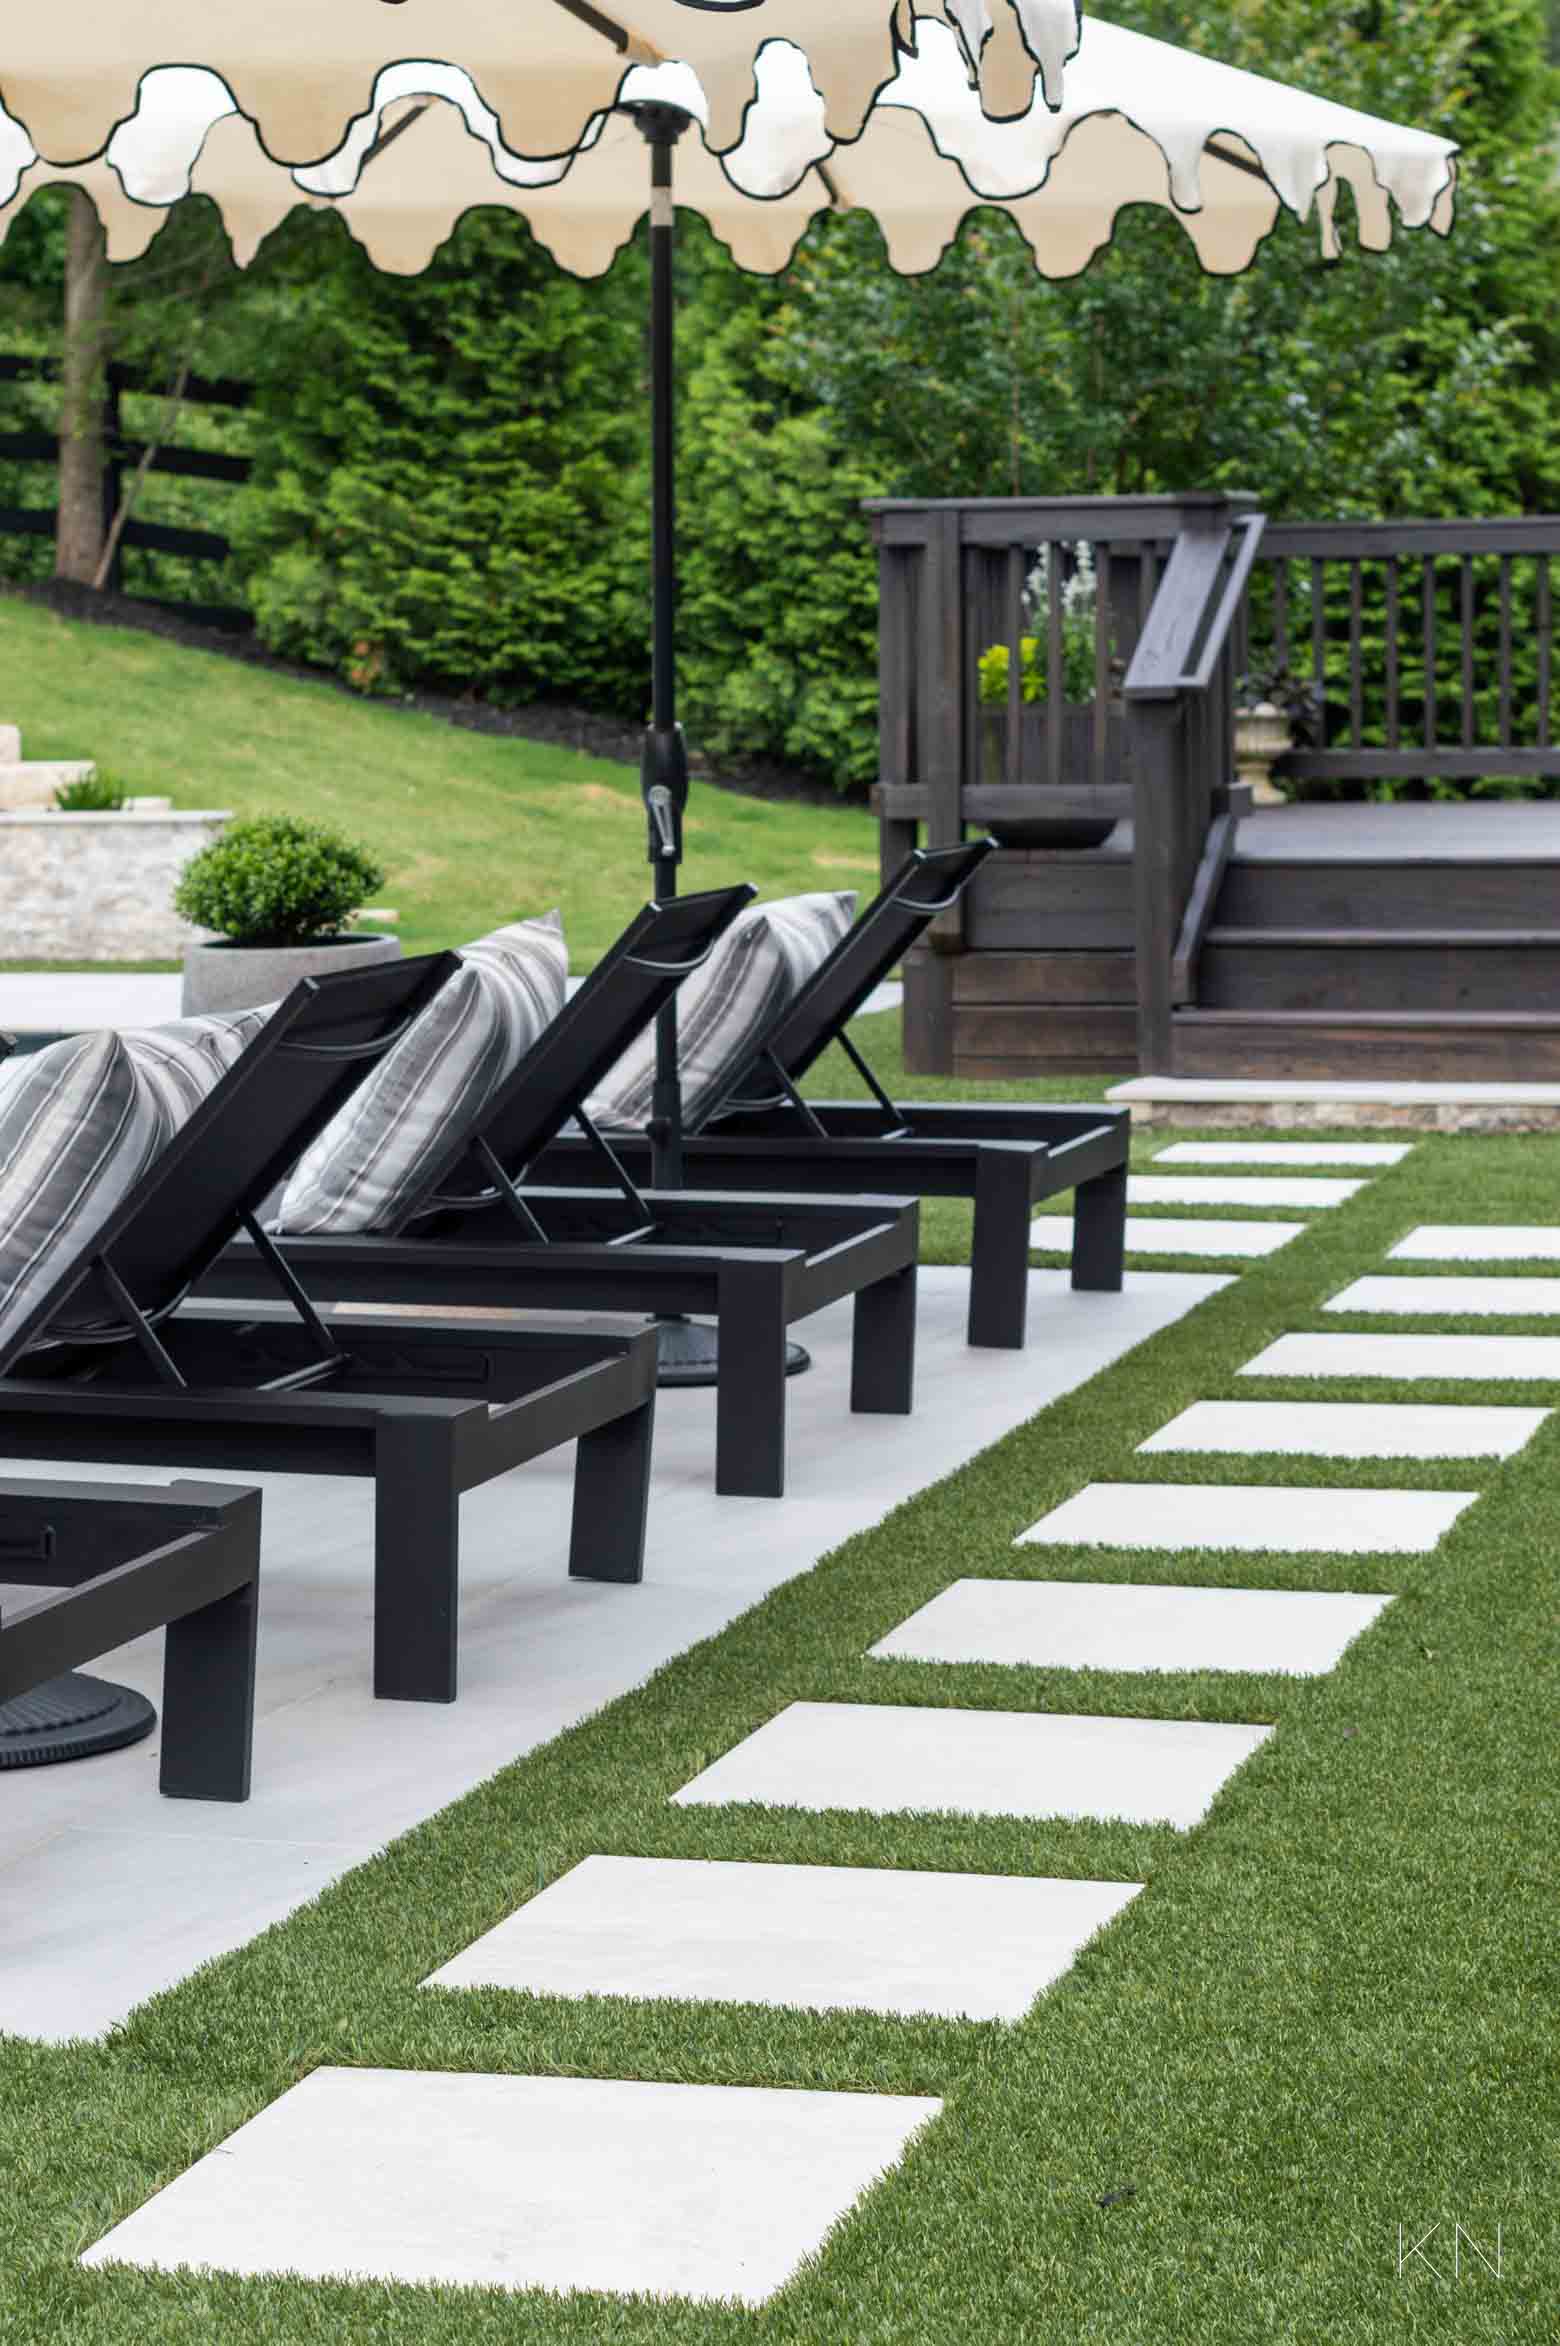 Pool Area Design with Artificial Turf